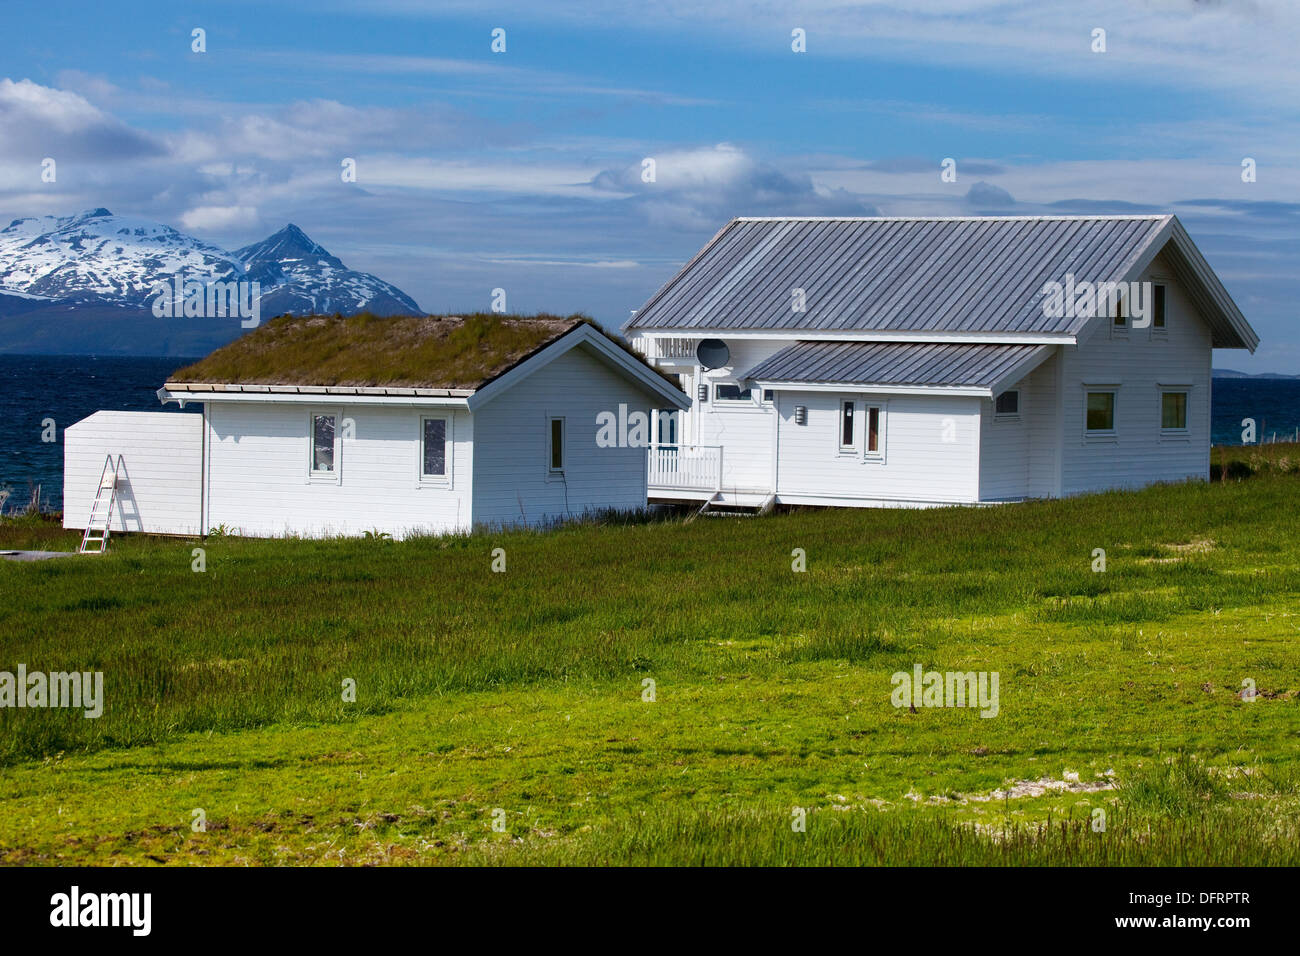 Houses with the traditional grass roof overlooking a fjord and snowy mountains in Lyngen Peninsula, Troms county, Norway, Europe Stock Photo